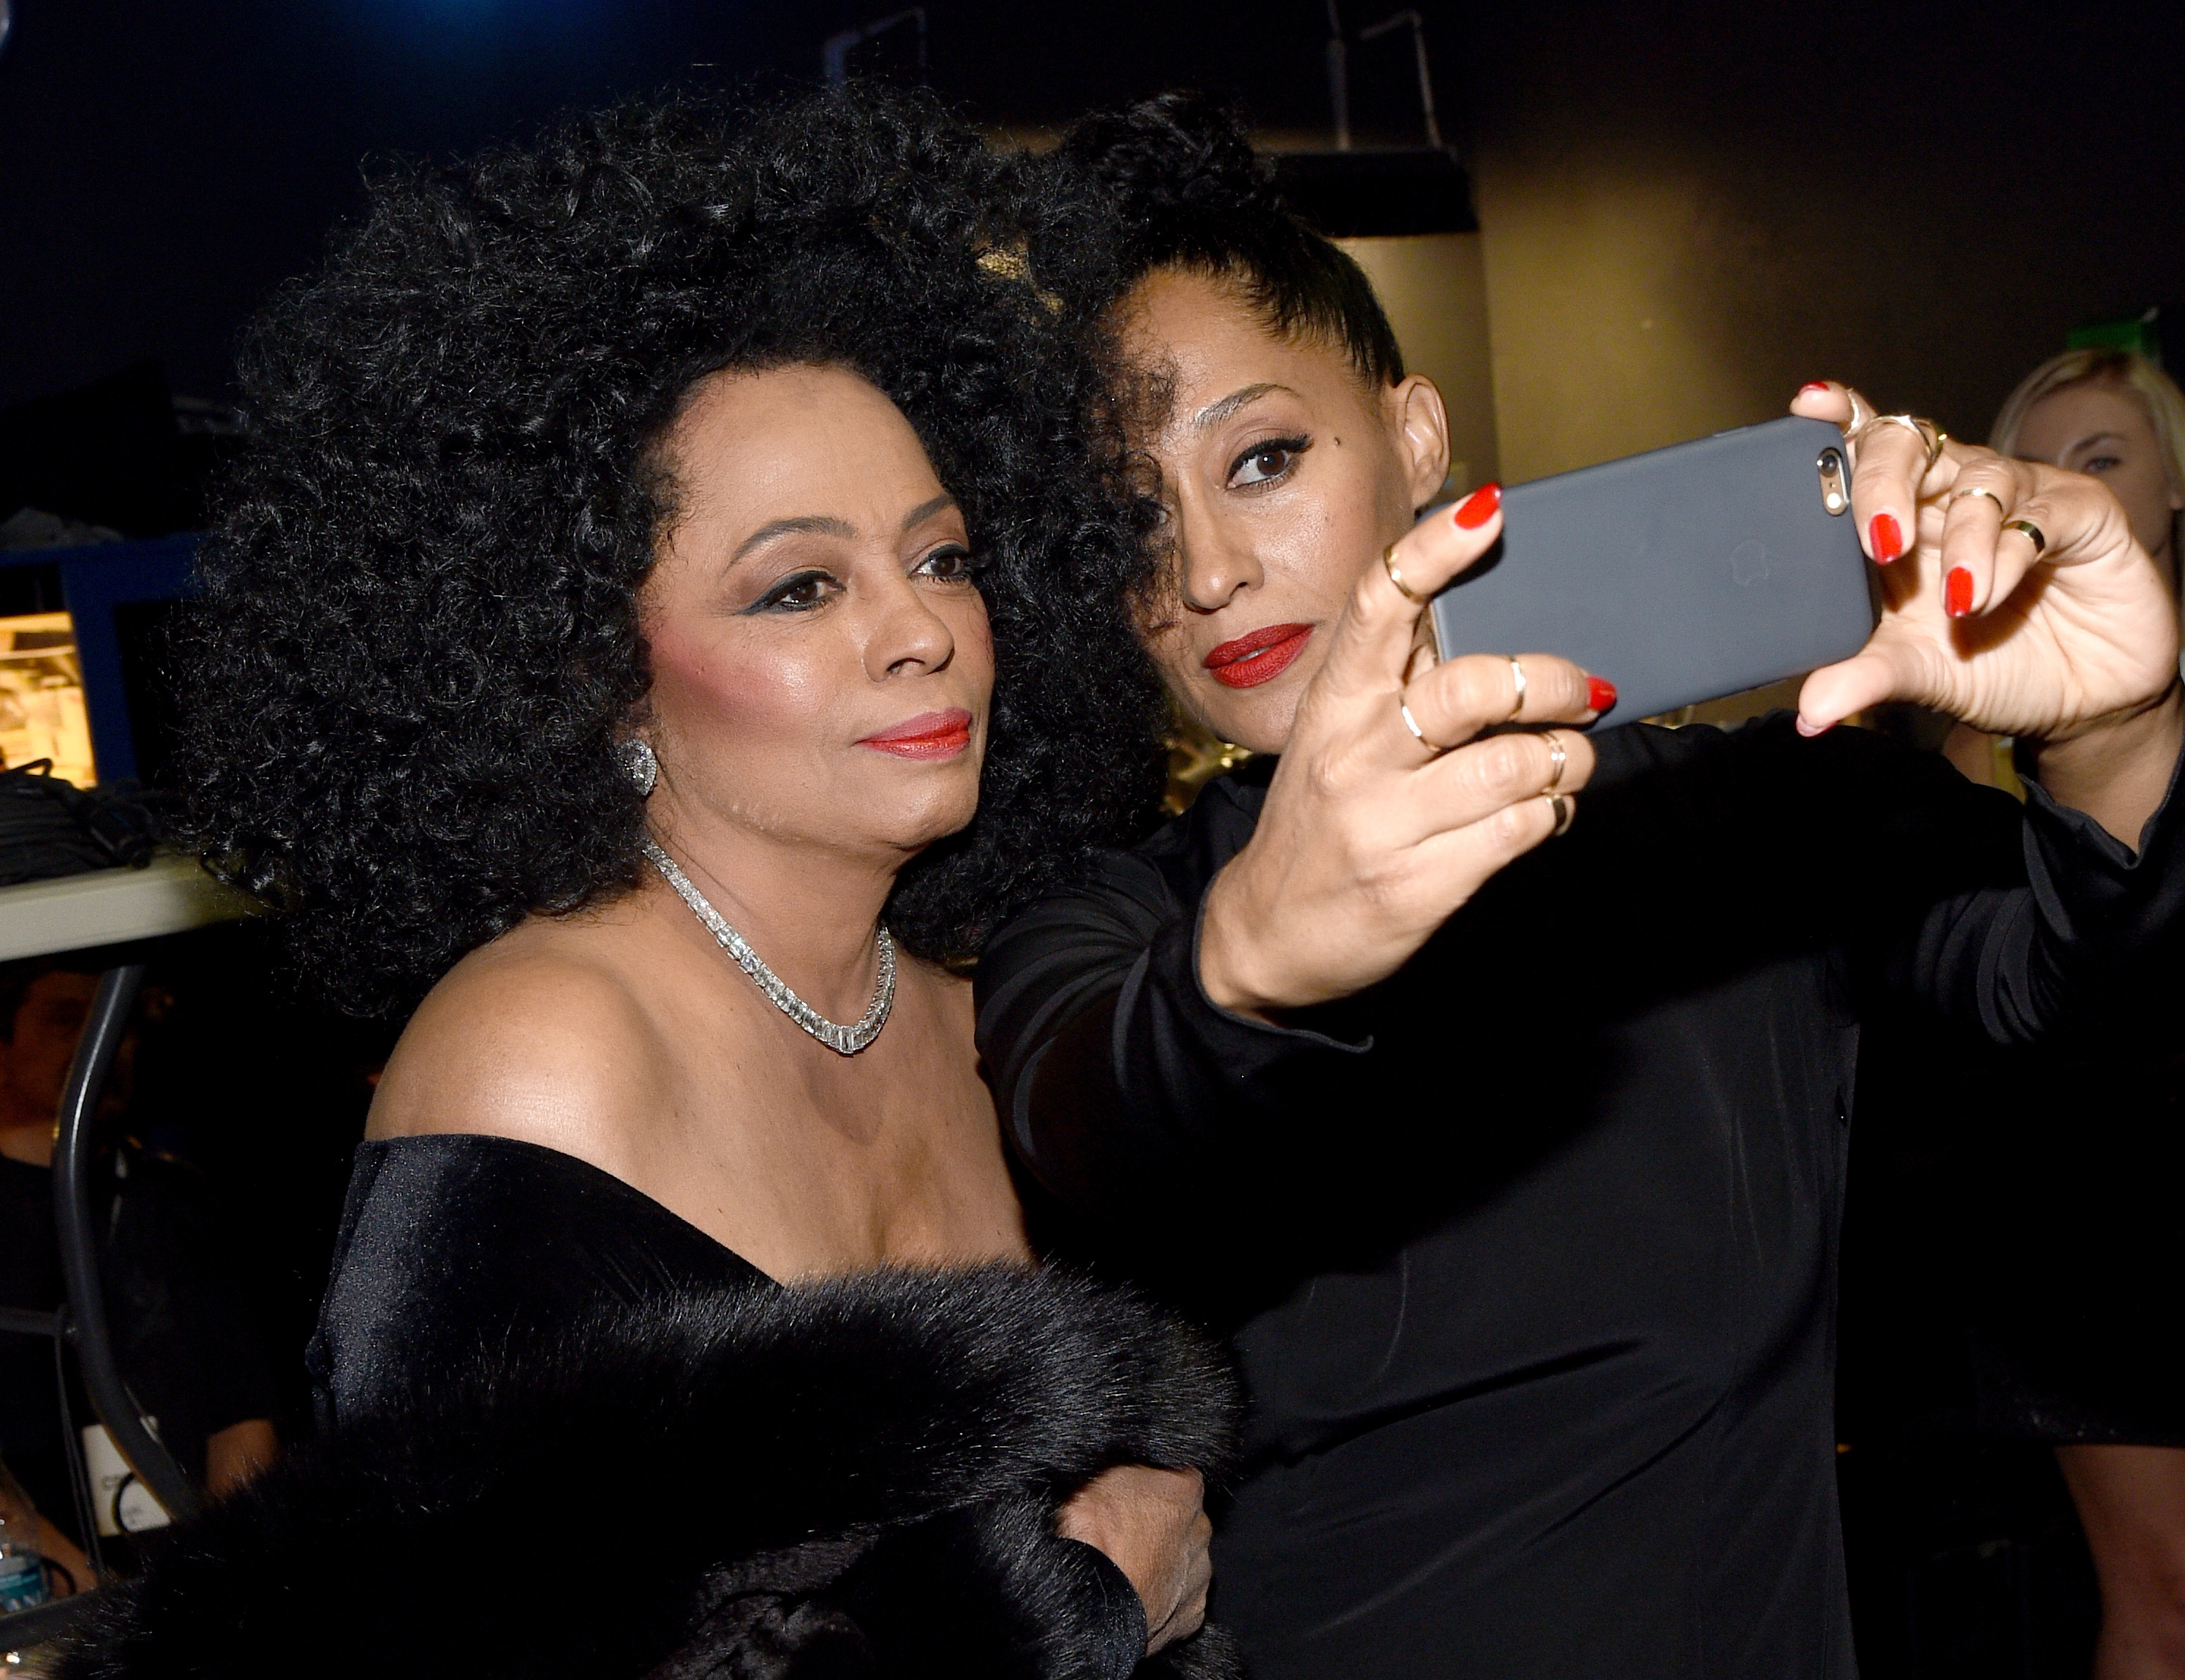 Diana Ross and Tracee Ellis Ross posing for a selfie at an awards show.